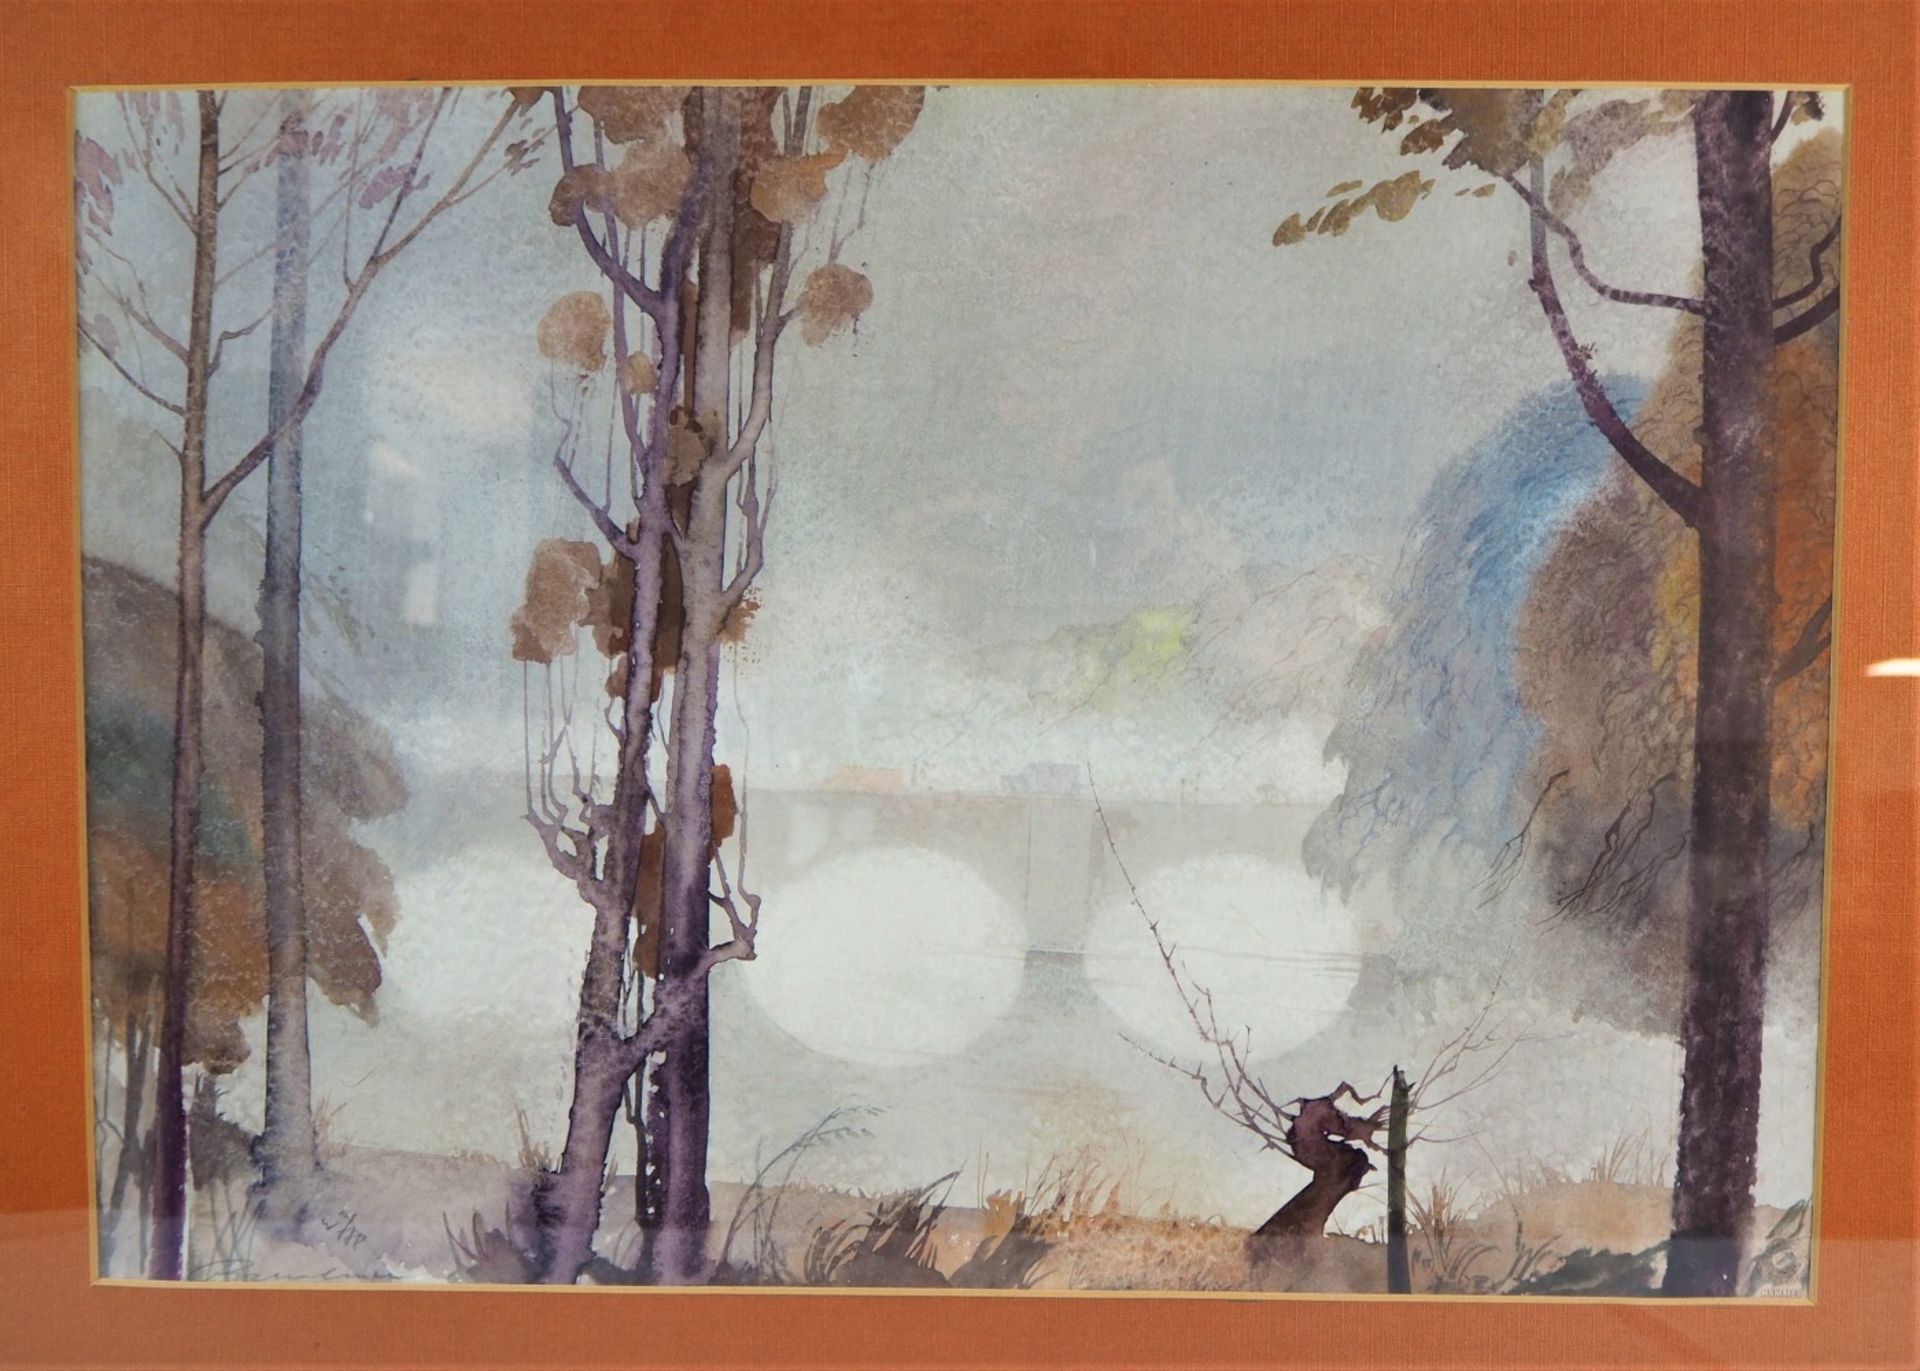 Watercolour Landscape with Bridge in the Fog - illegibly signed